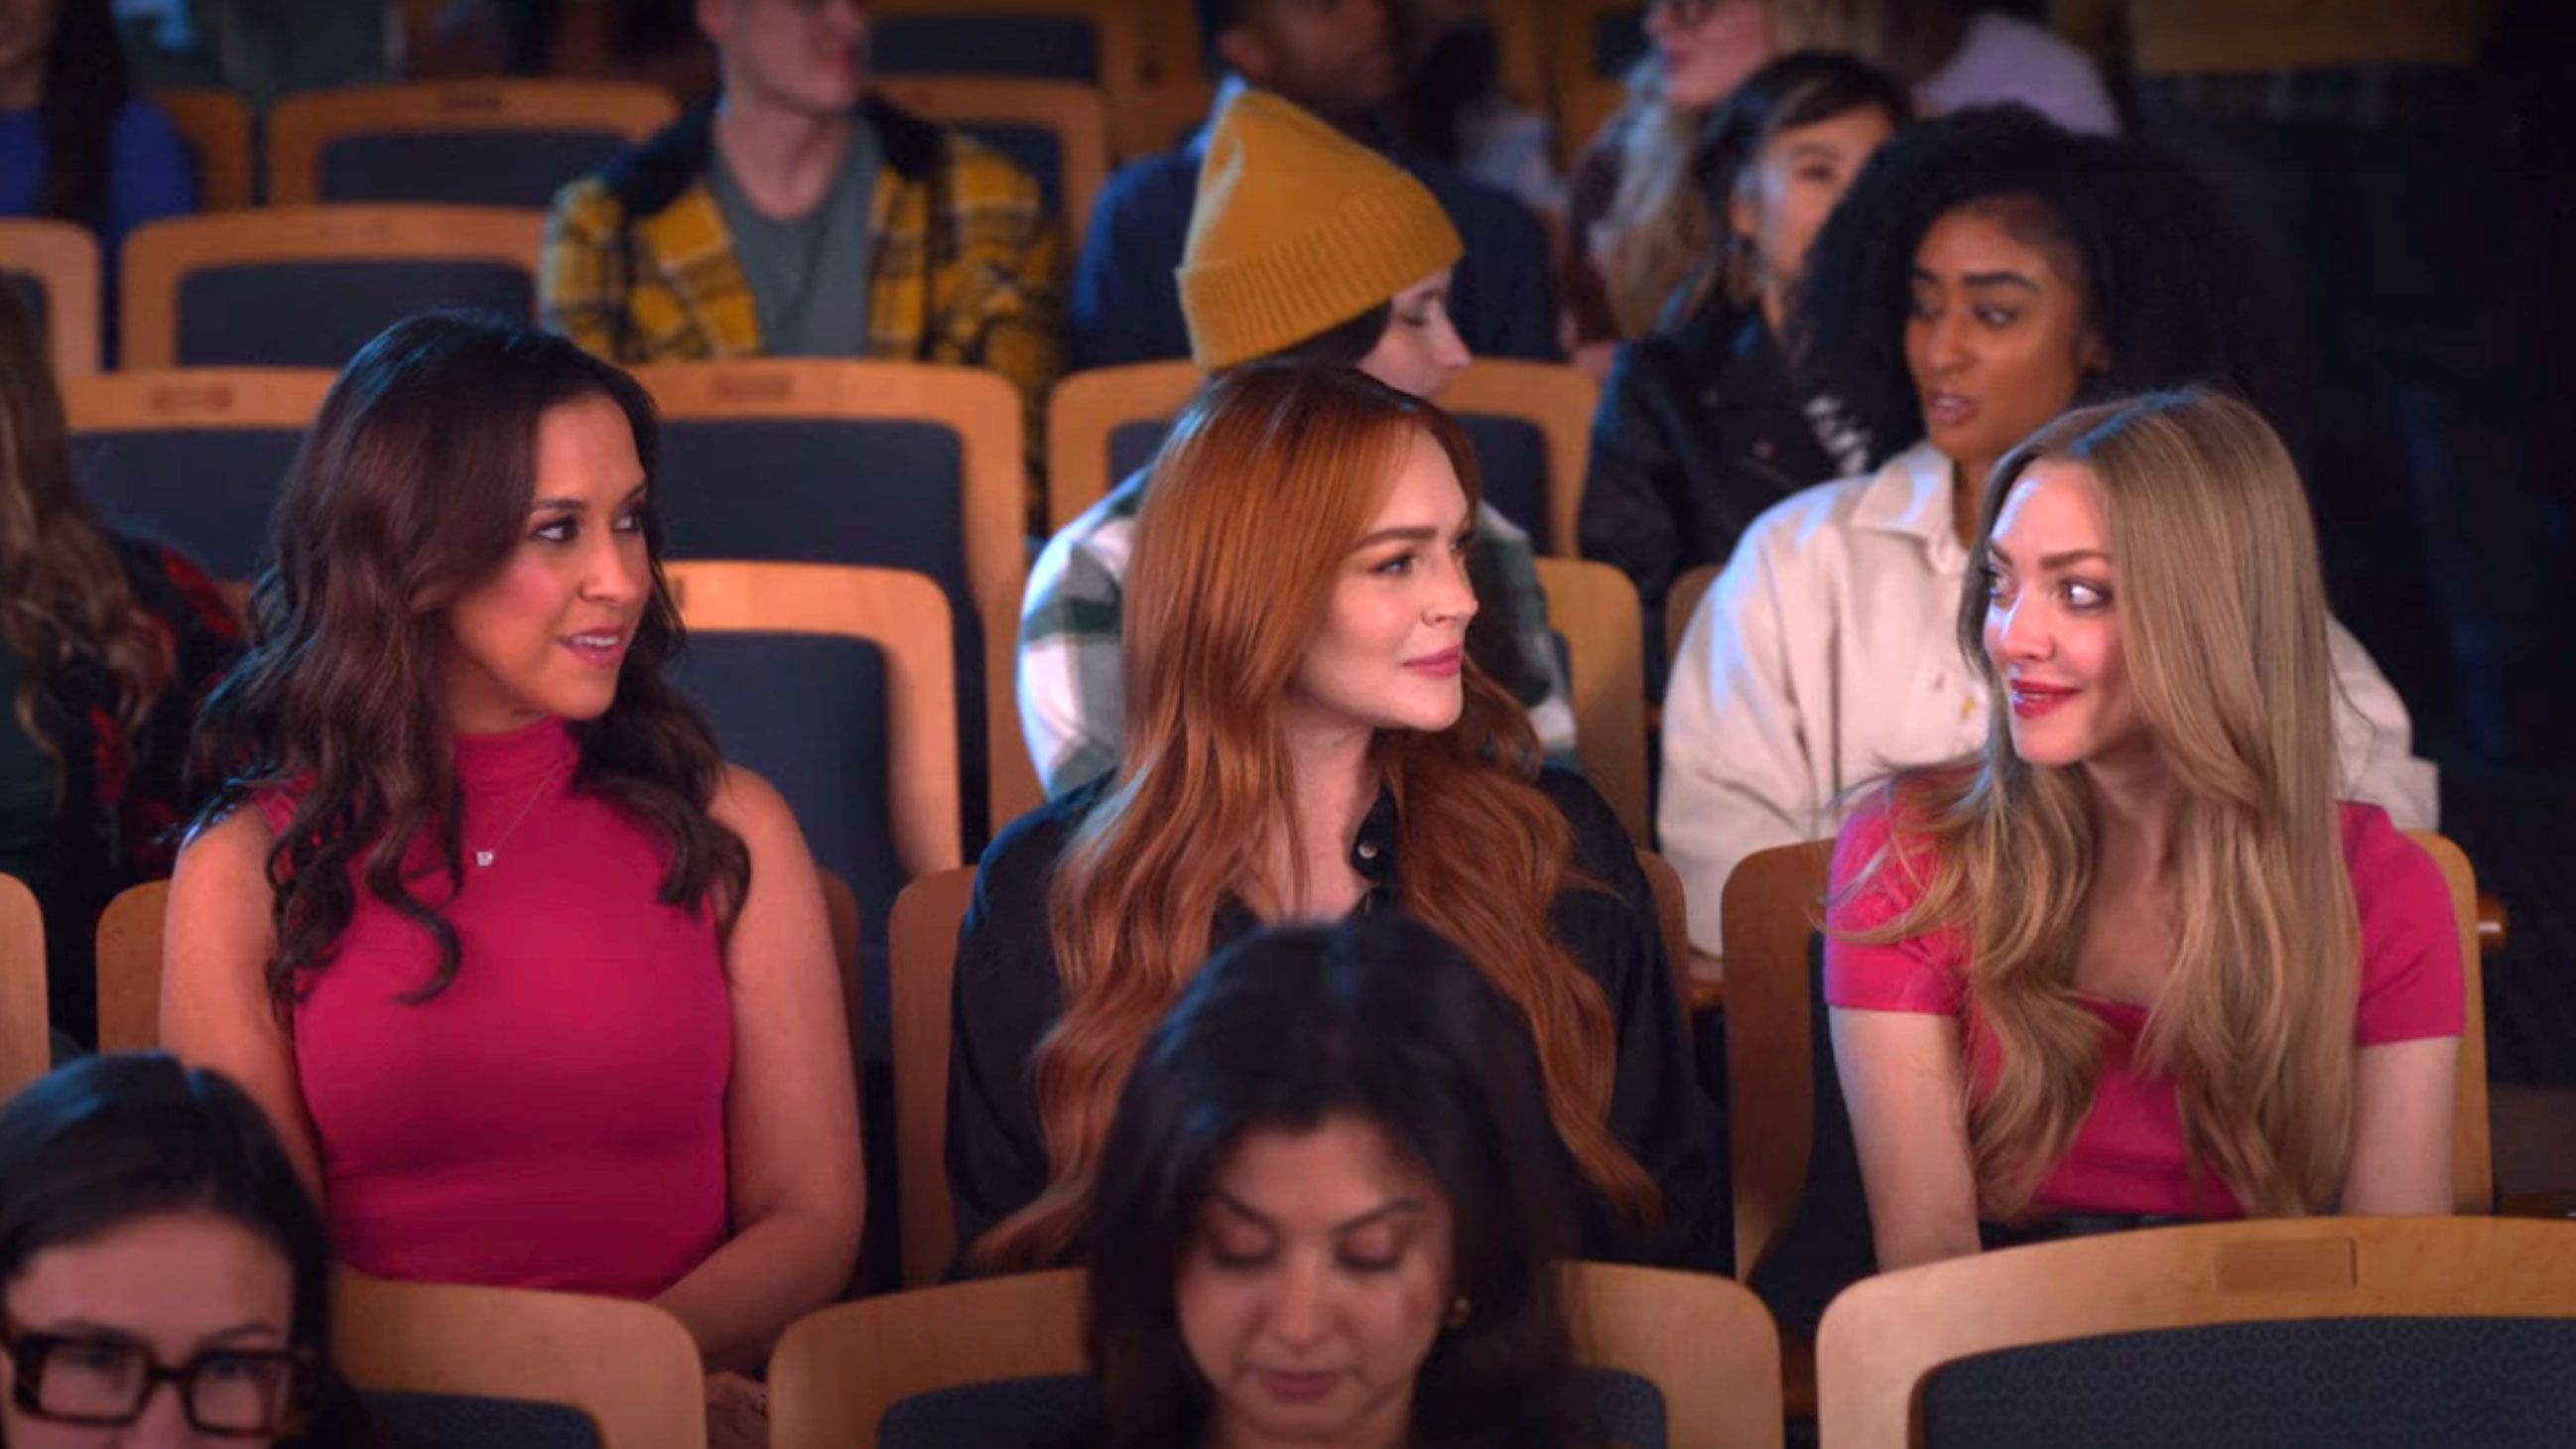 See Lindsay Lohan, Amanda Seyfried, and Lacey Chabert's 'Mean Girls' Ad